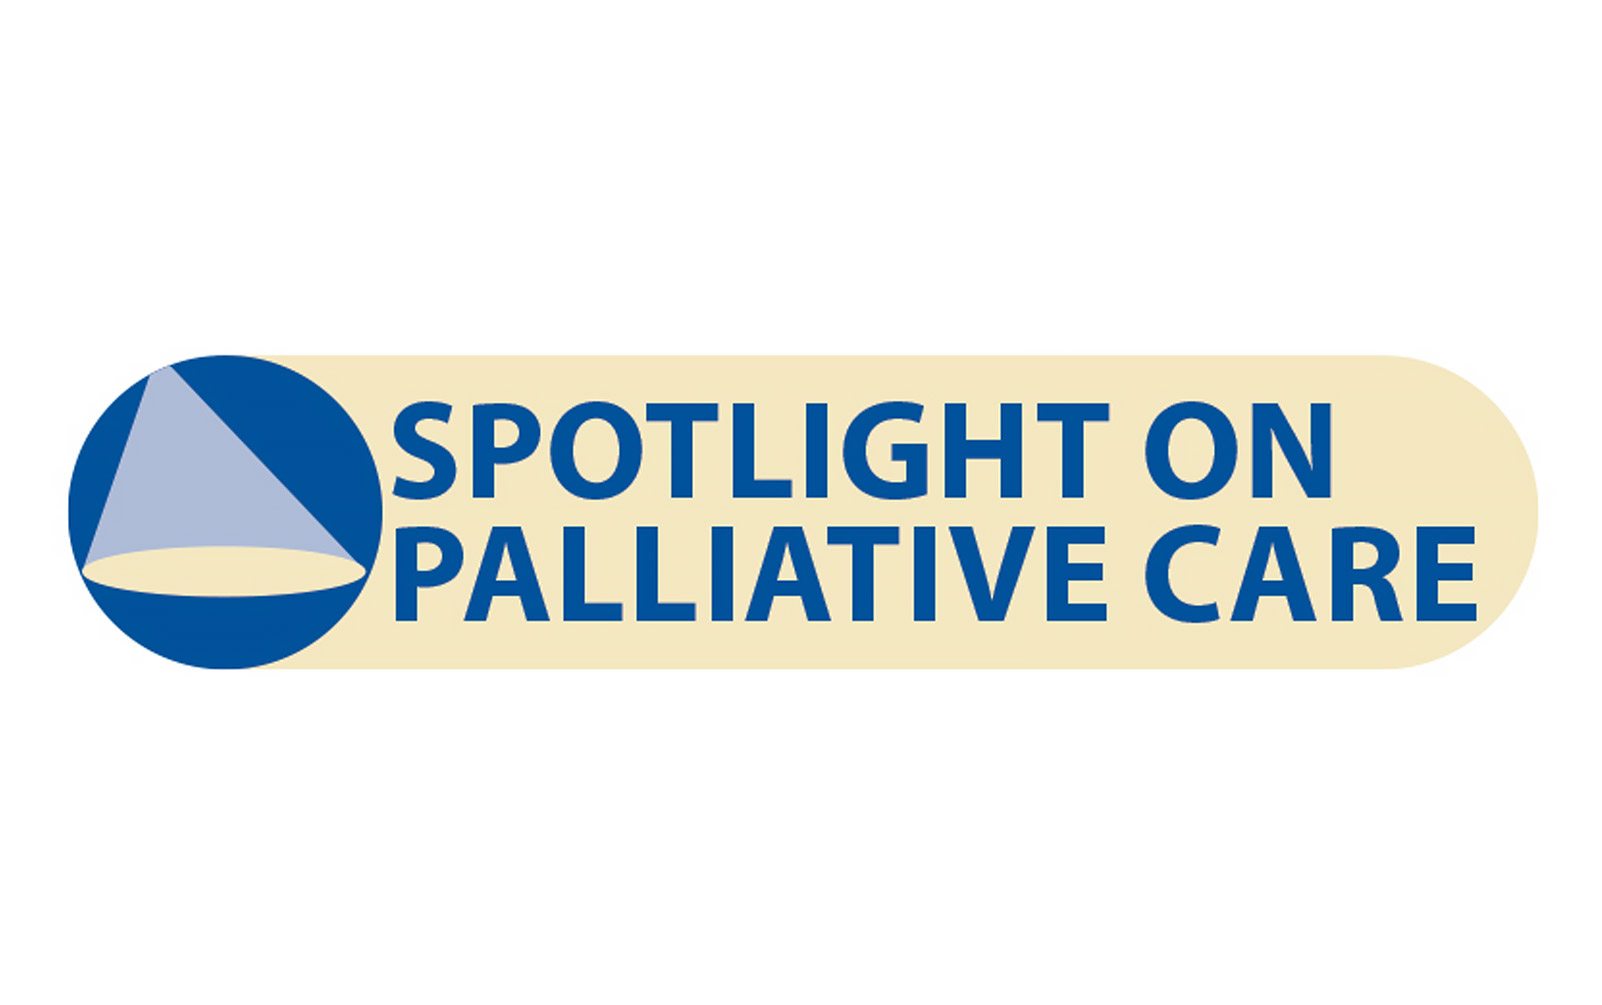 Palliative Care: Combating Stigma and Enhancing Quality of Care - A Worldwide Perspective